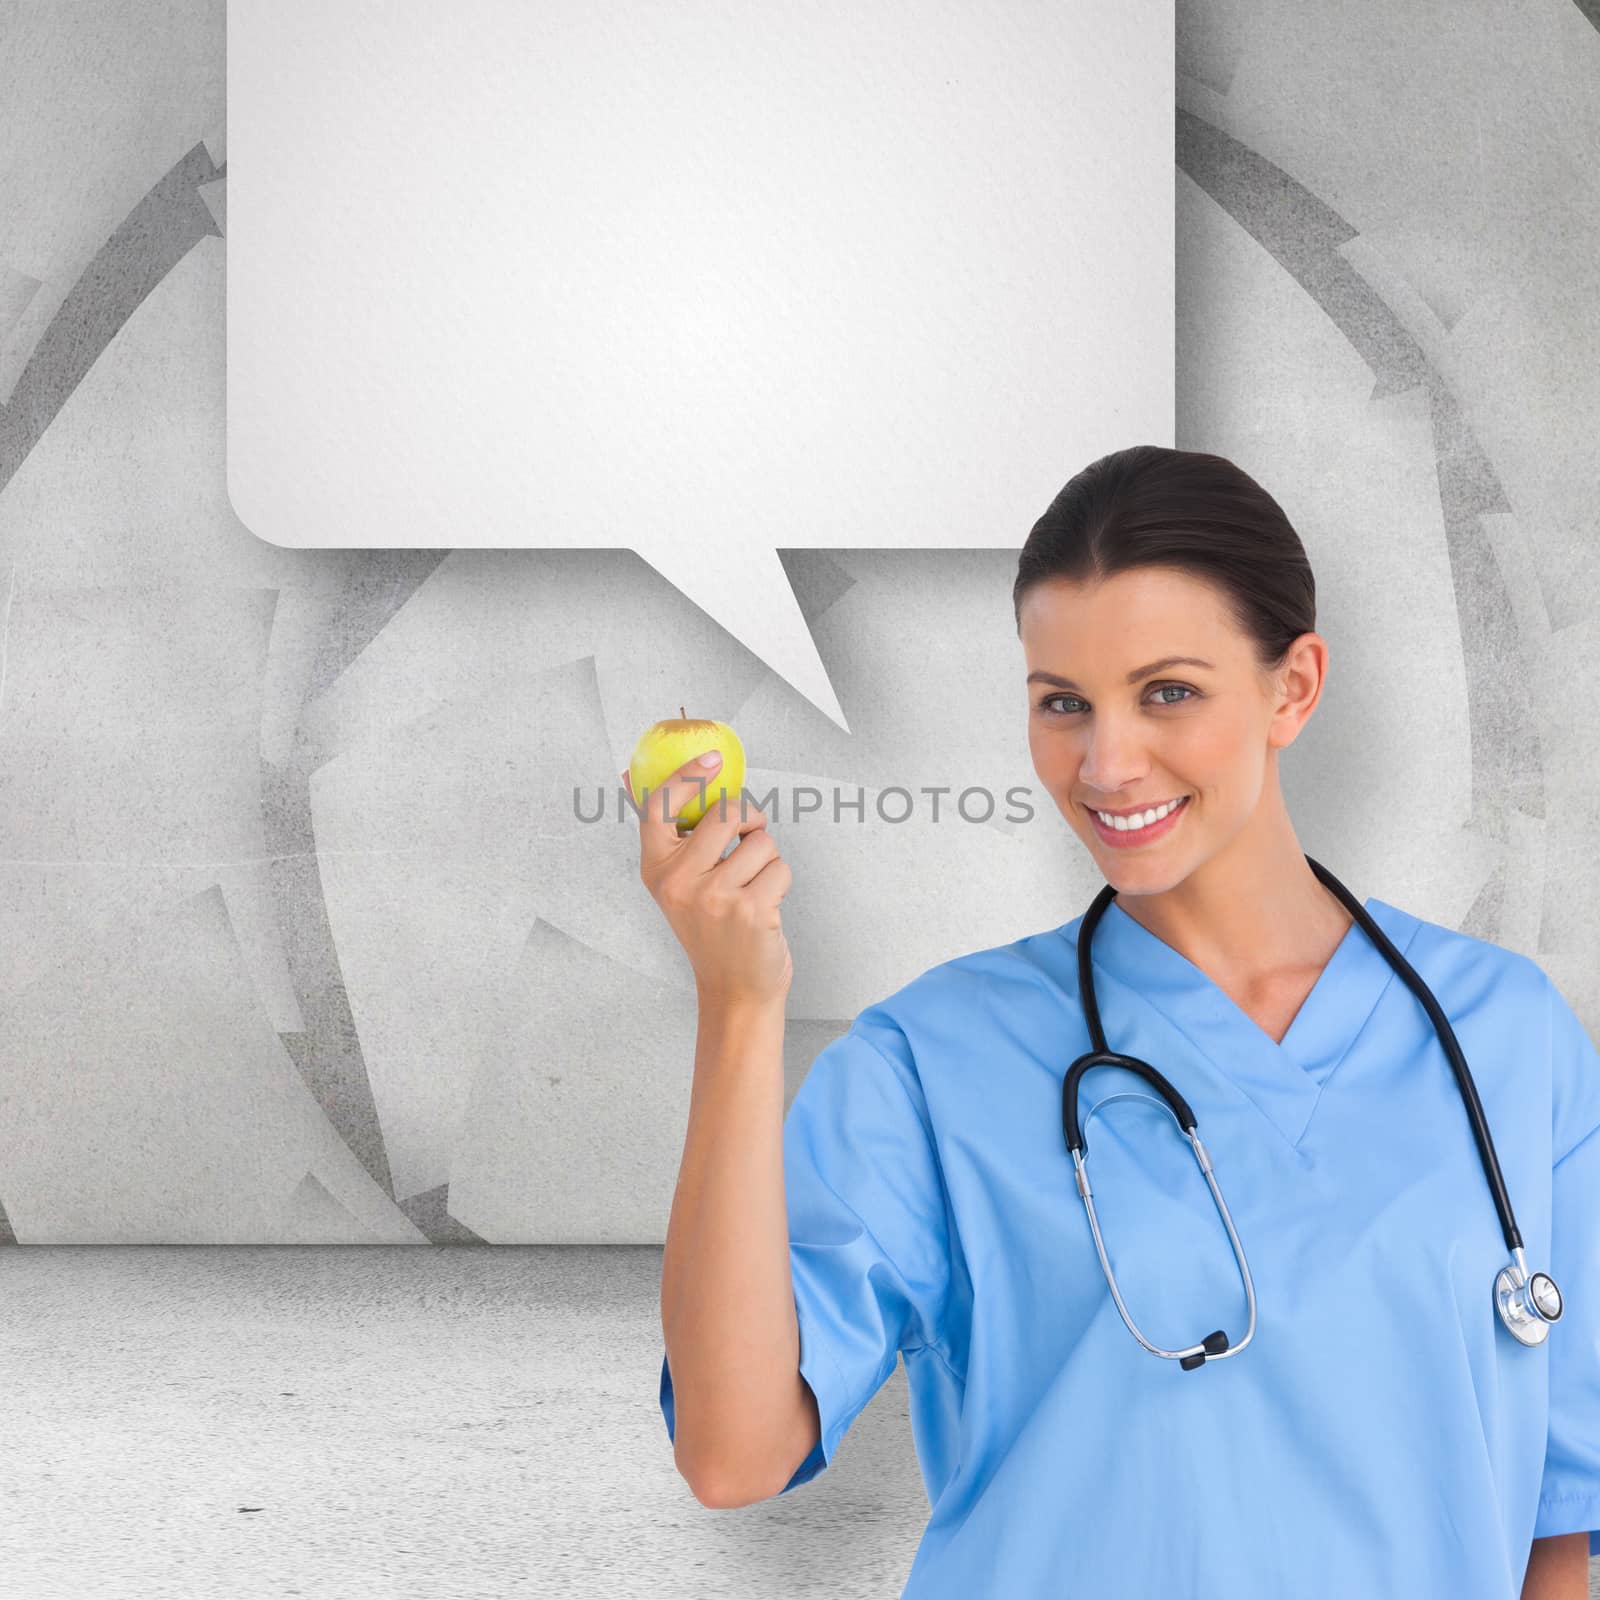 Happy surgeon holding an apple and smiling at camera against speech bubble